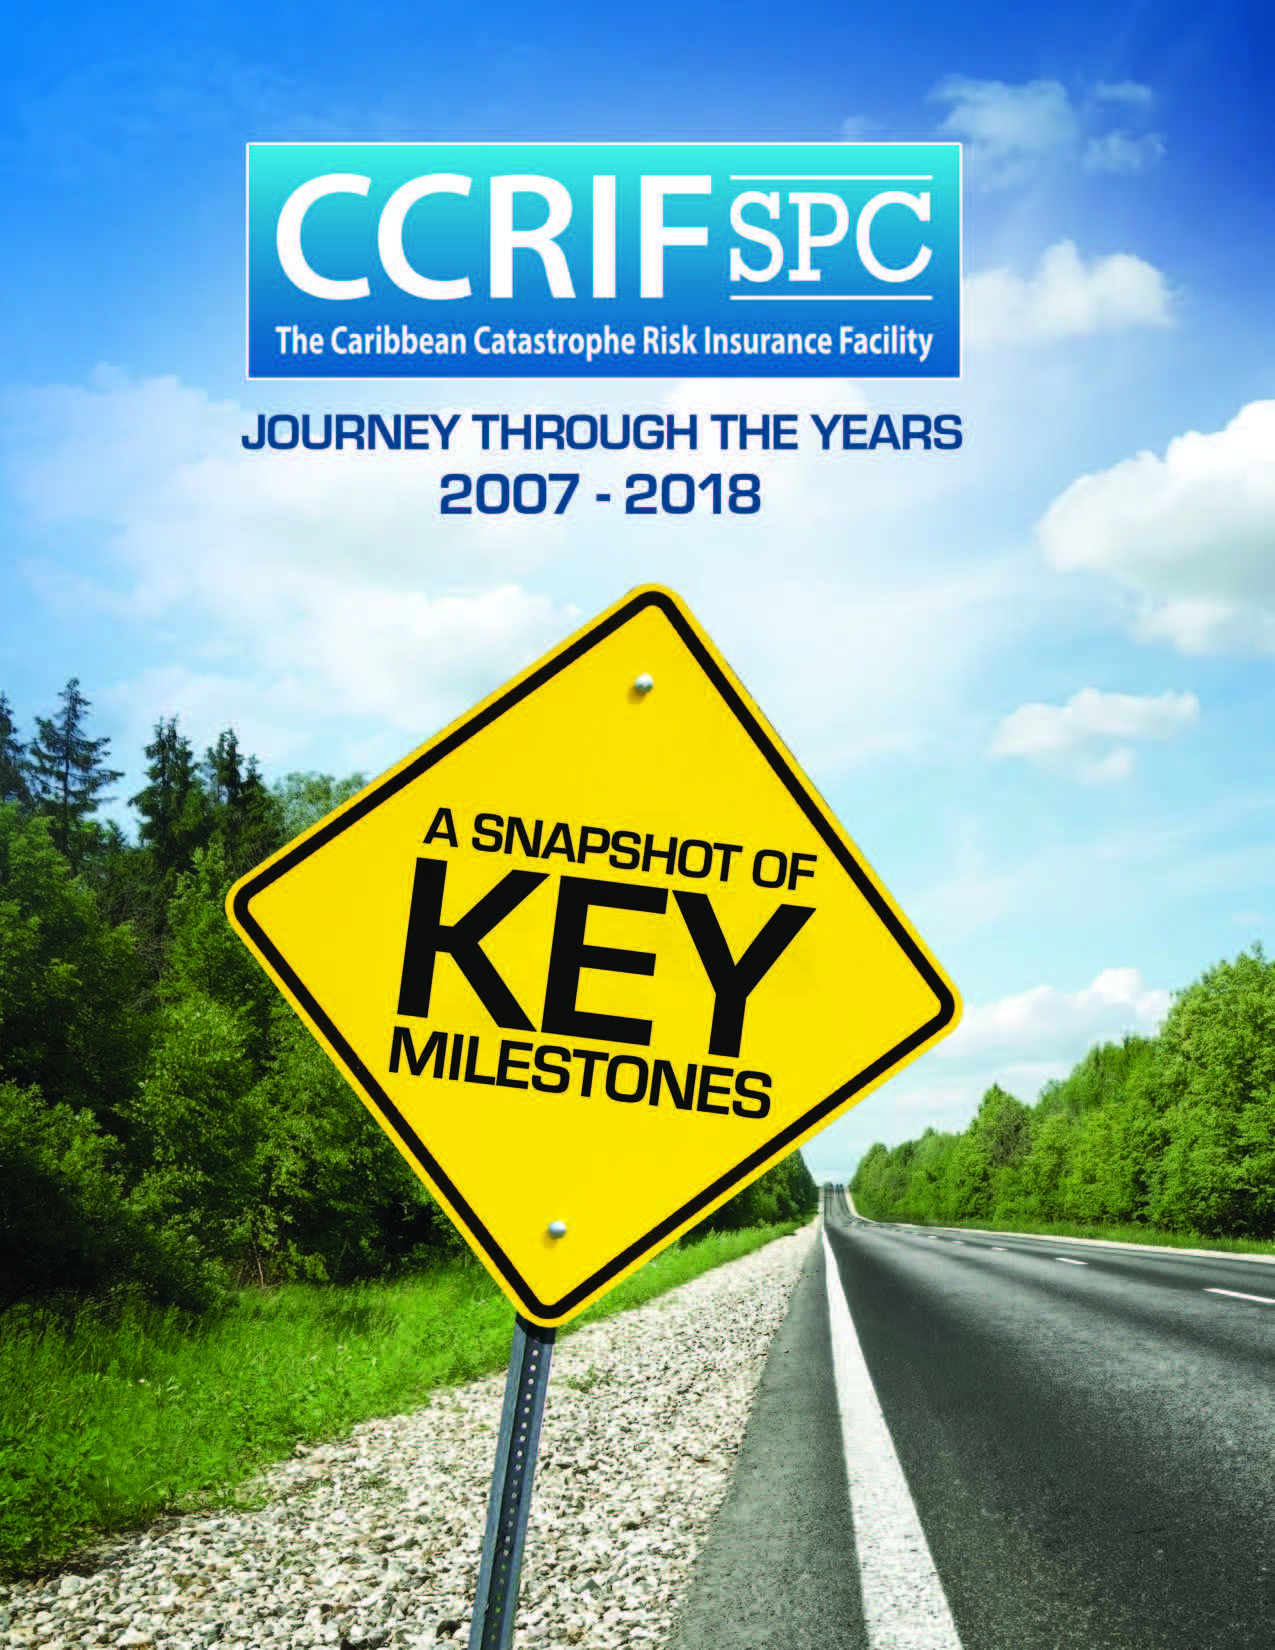 CCRIF SPC Journey Through the Years 2007 - 2018 Brochure